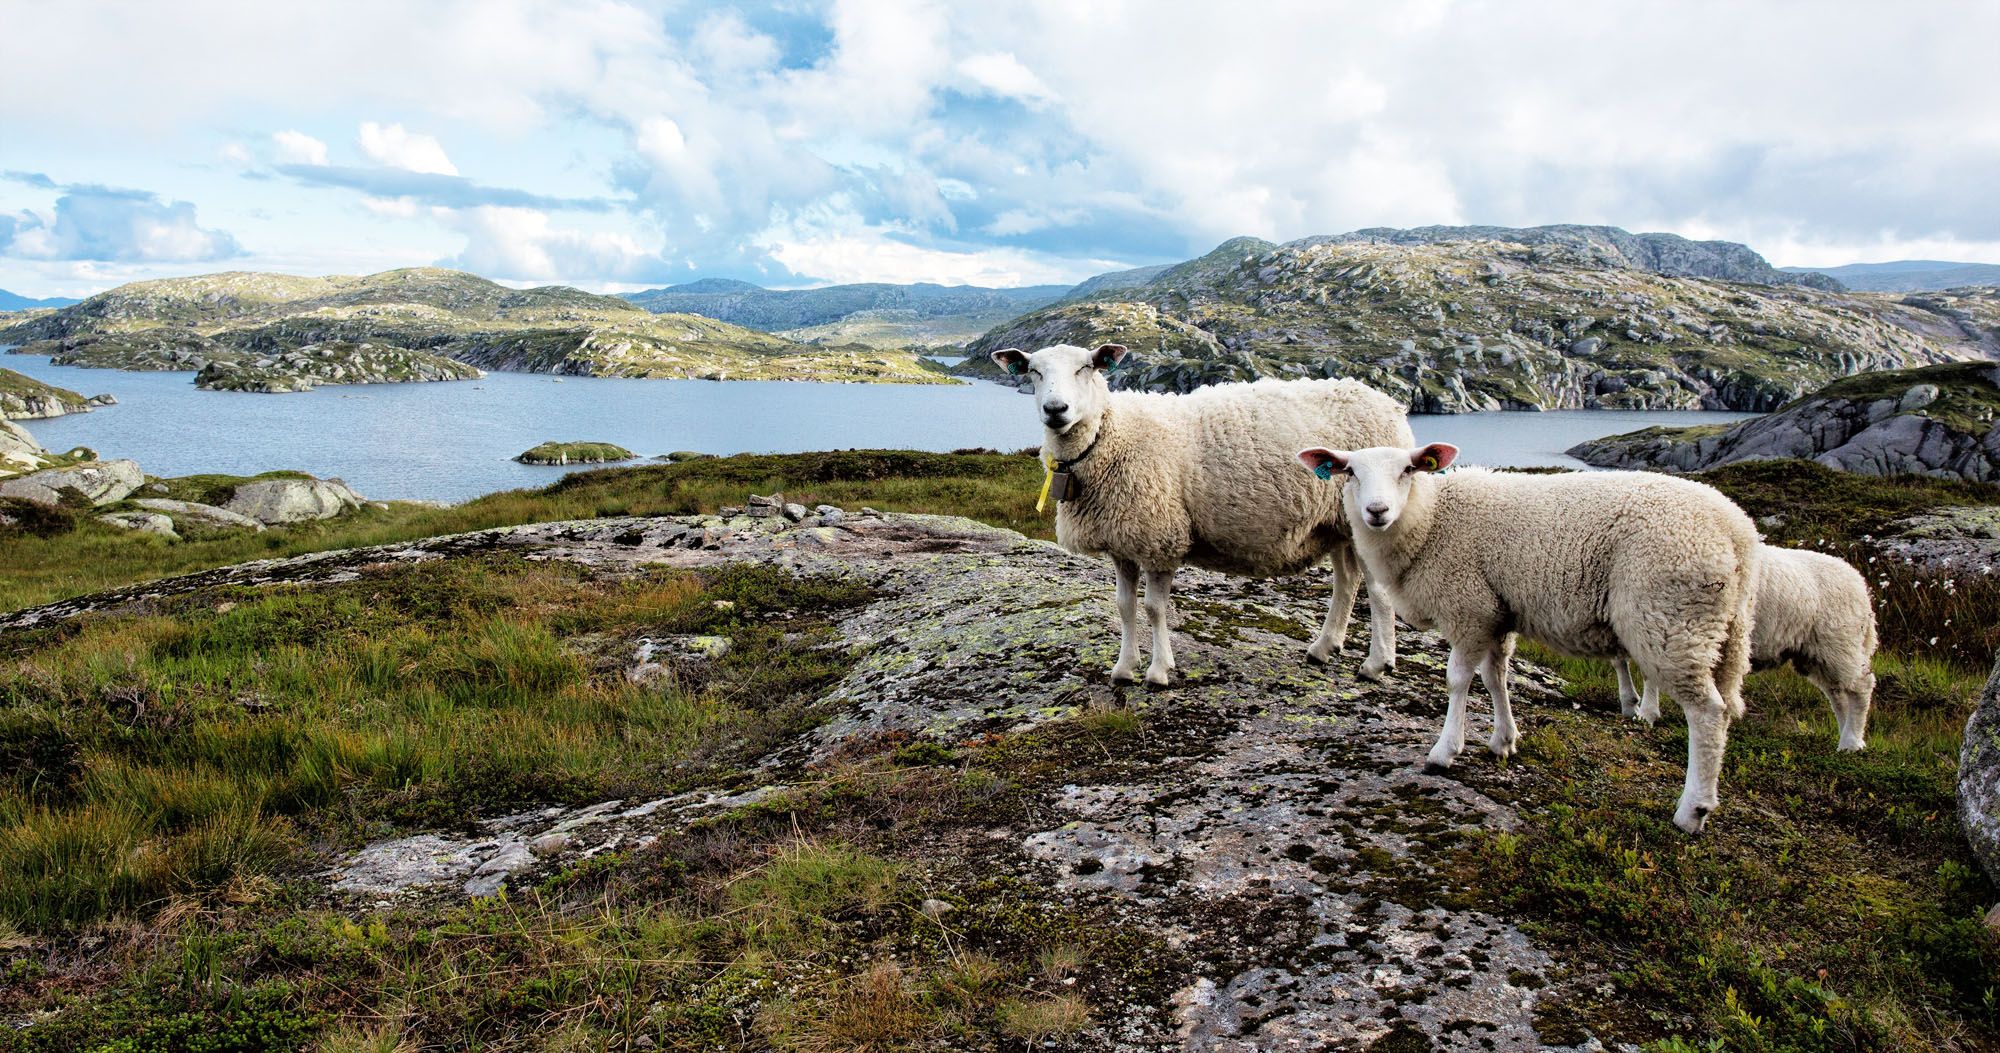 Featured image for “10 Day Norway Itinerary: Ultimate Road Trip through the Fjord Region”